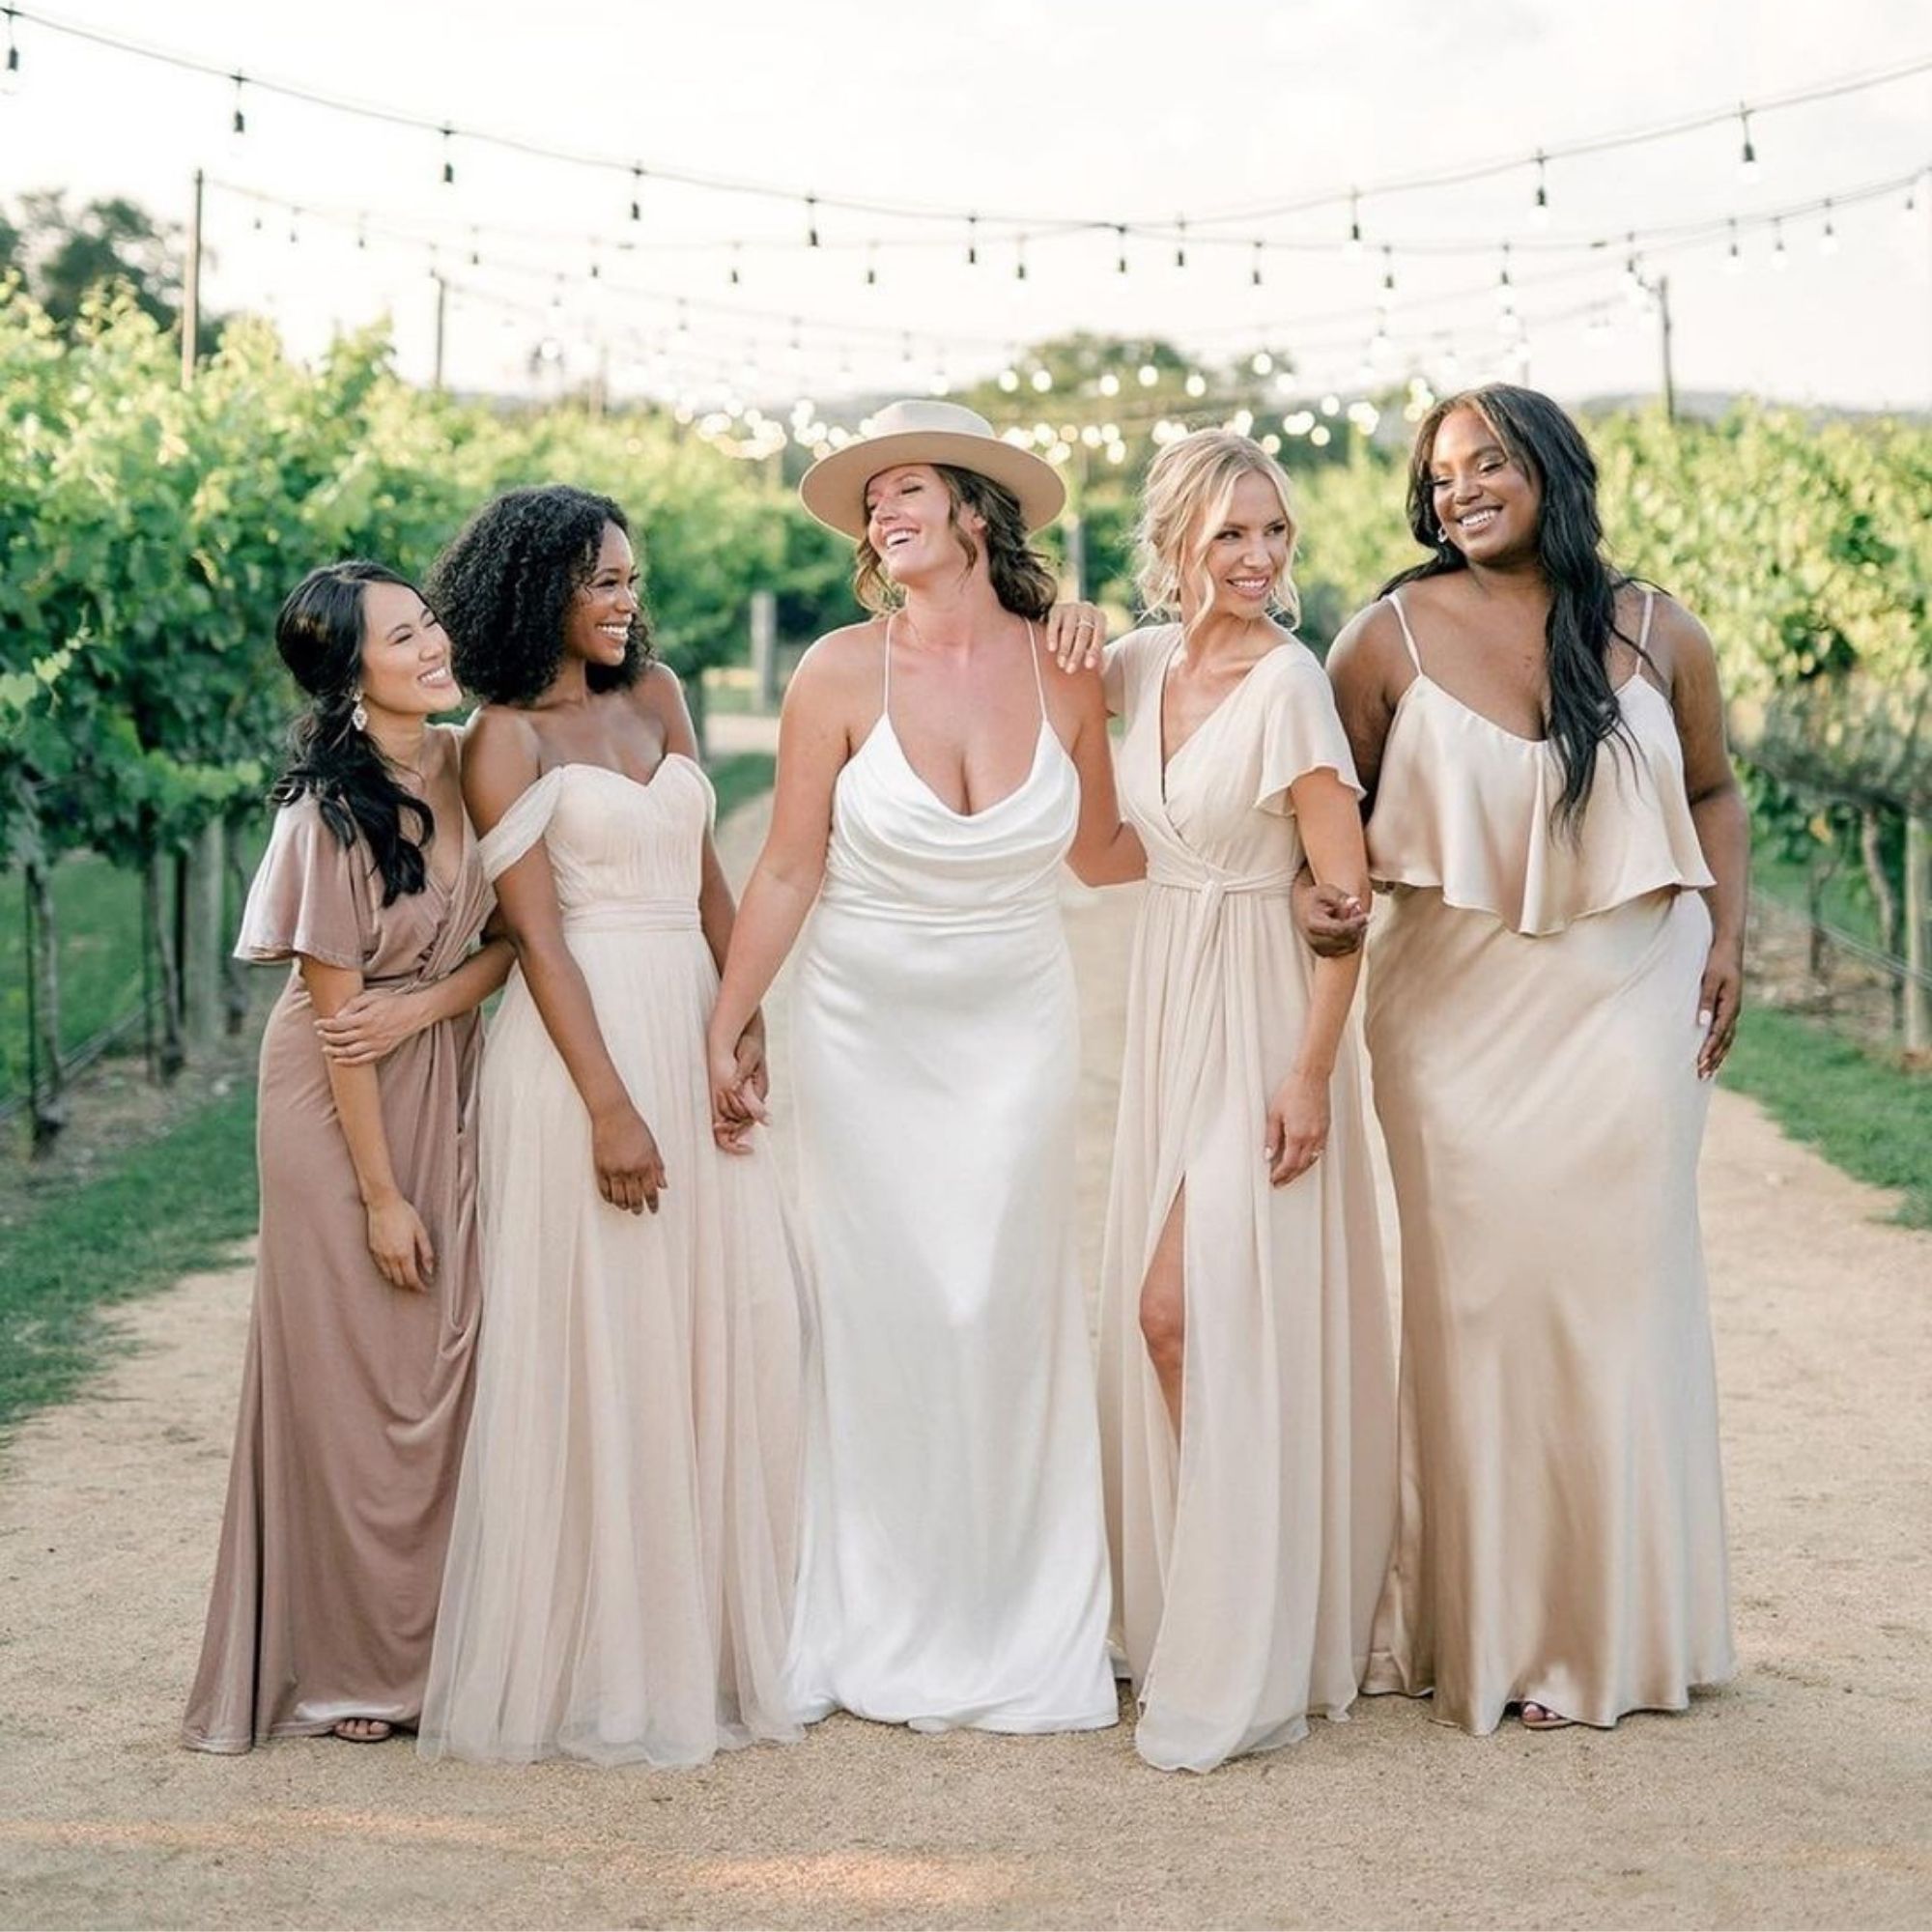 The Most Stunning Champagne Bridesmaid Dresses in Every Style